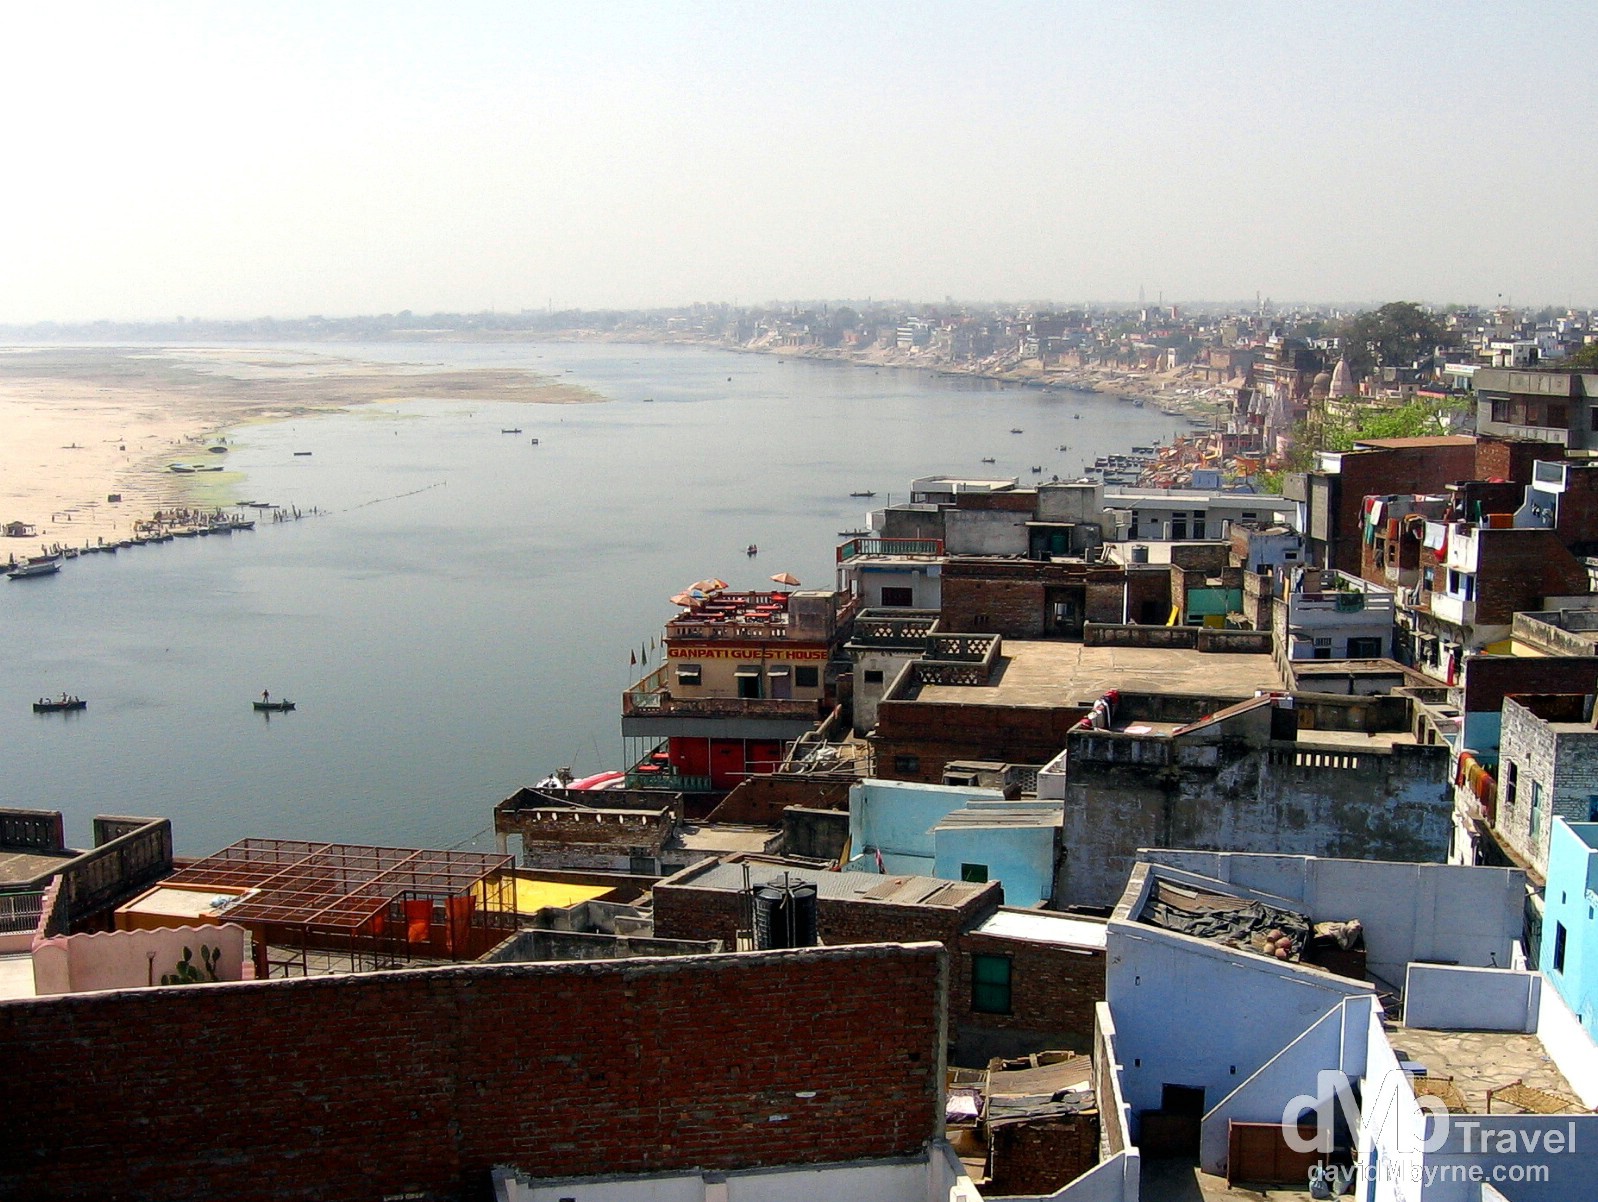 A view of Varanasi and the sacred River Ganges from the rooftop of the Puja guesthouse. Varanasi, Uttar Pradesh, India. March 17, 2008.